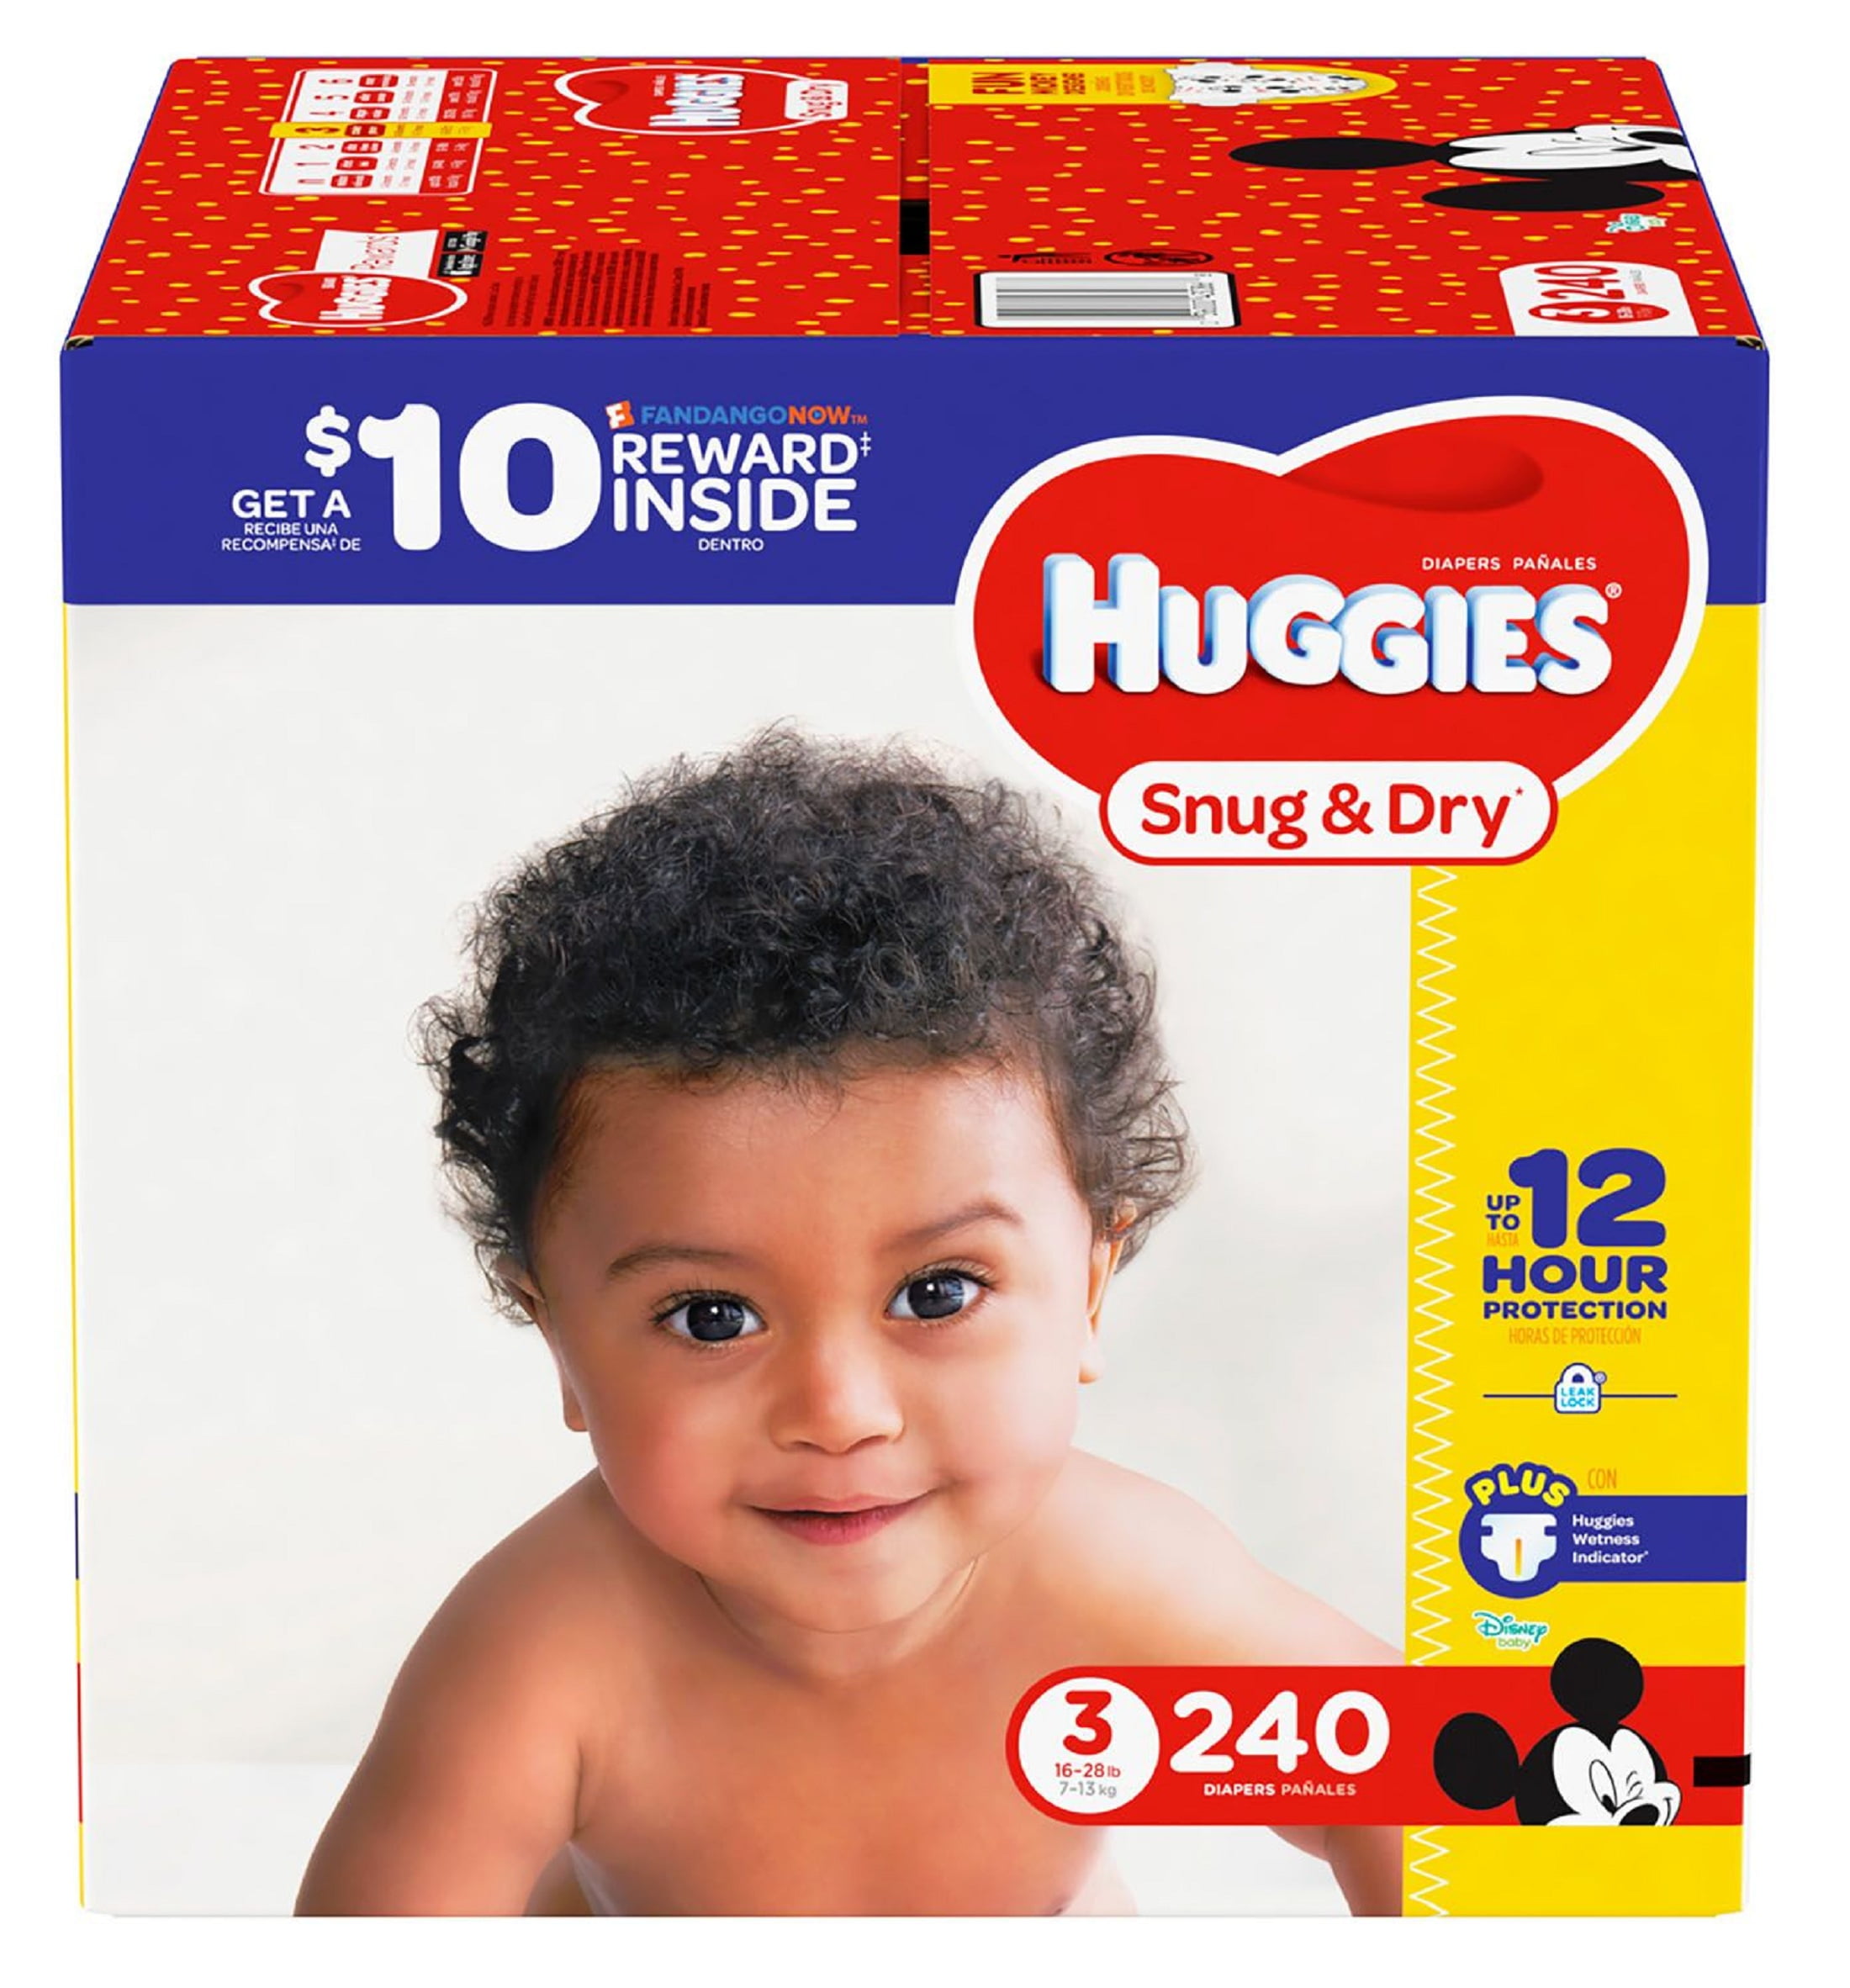 Huggies Snug &amp; Dry Diapers Size 3 -240 ct. (16-28 lbs.) - Bulk Qty, Free Shipping - Comfortable, Soft, No leaking &amp; Good nite Diapers